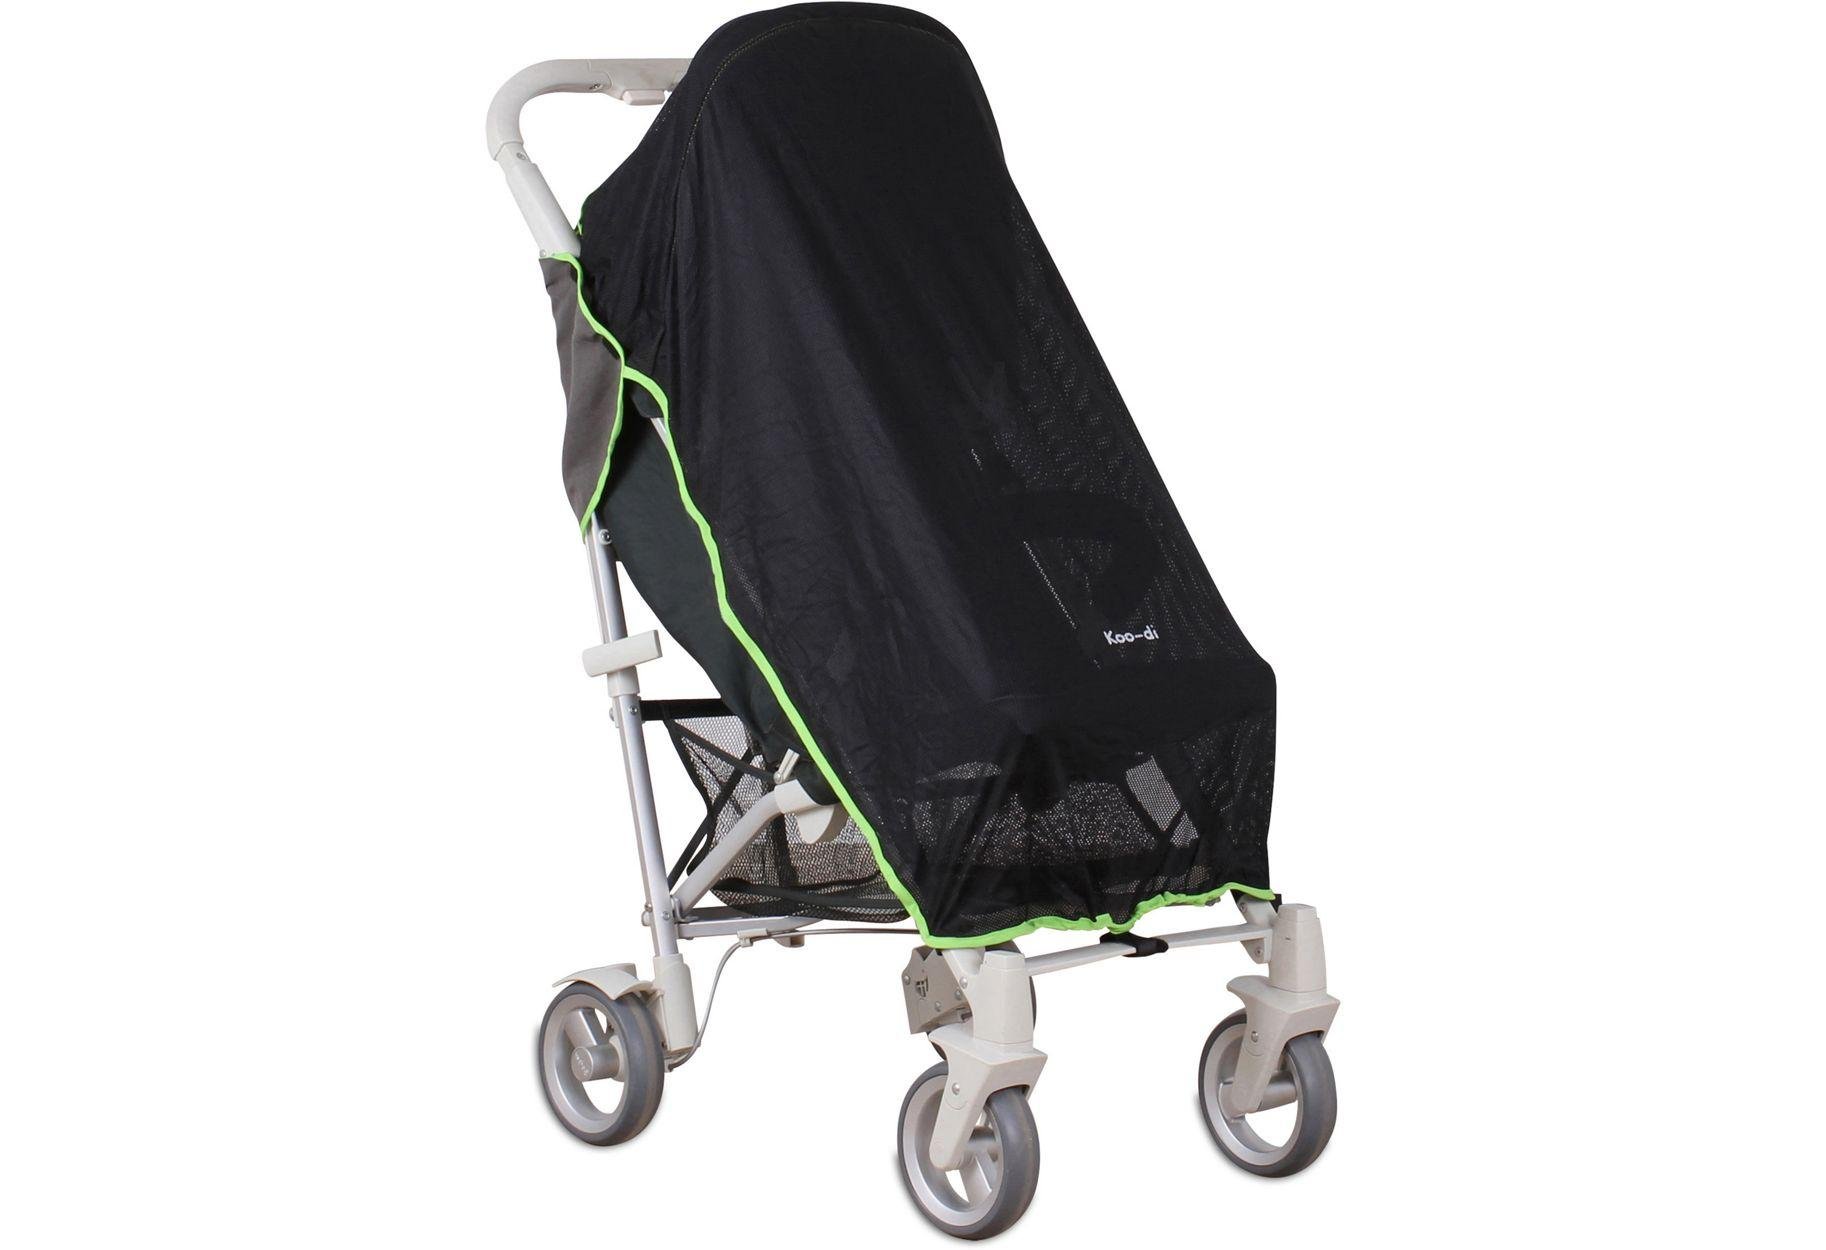 Koo-di Pack-It Sun and Sleep Pushchair Cover. Review